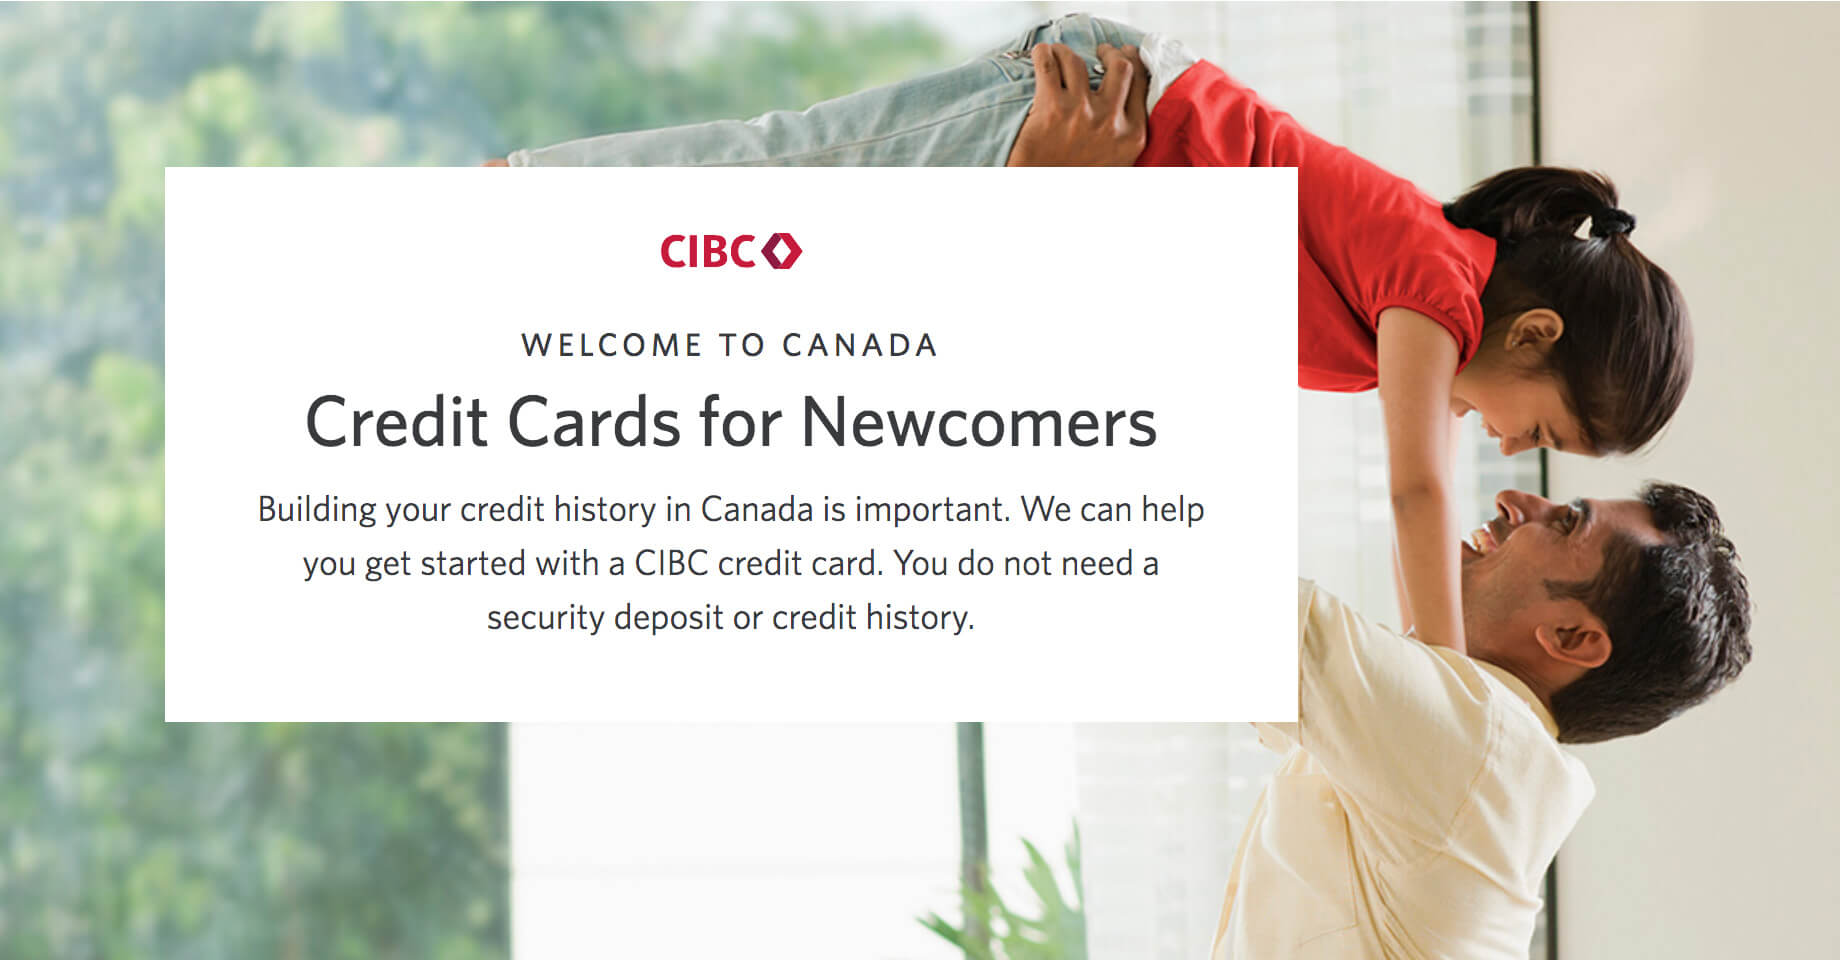 CIBC - Newcomers To Canada